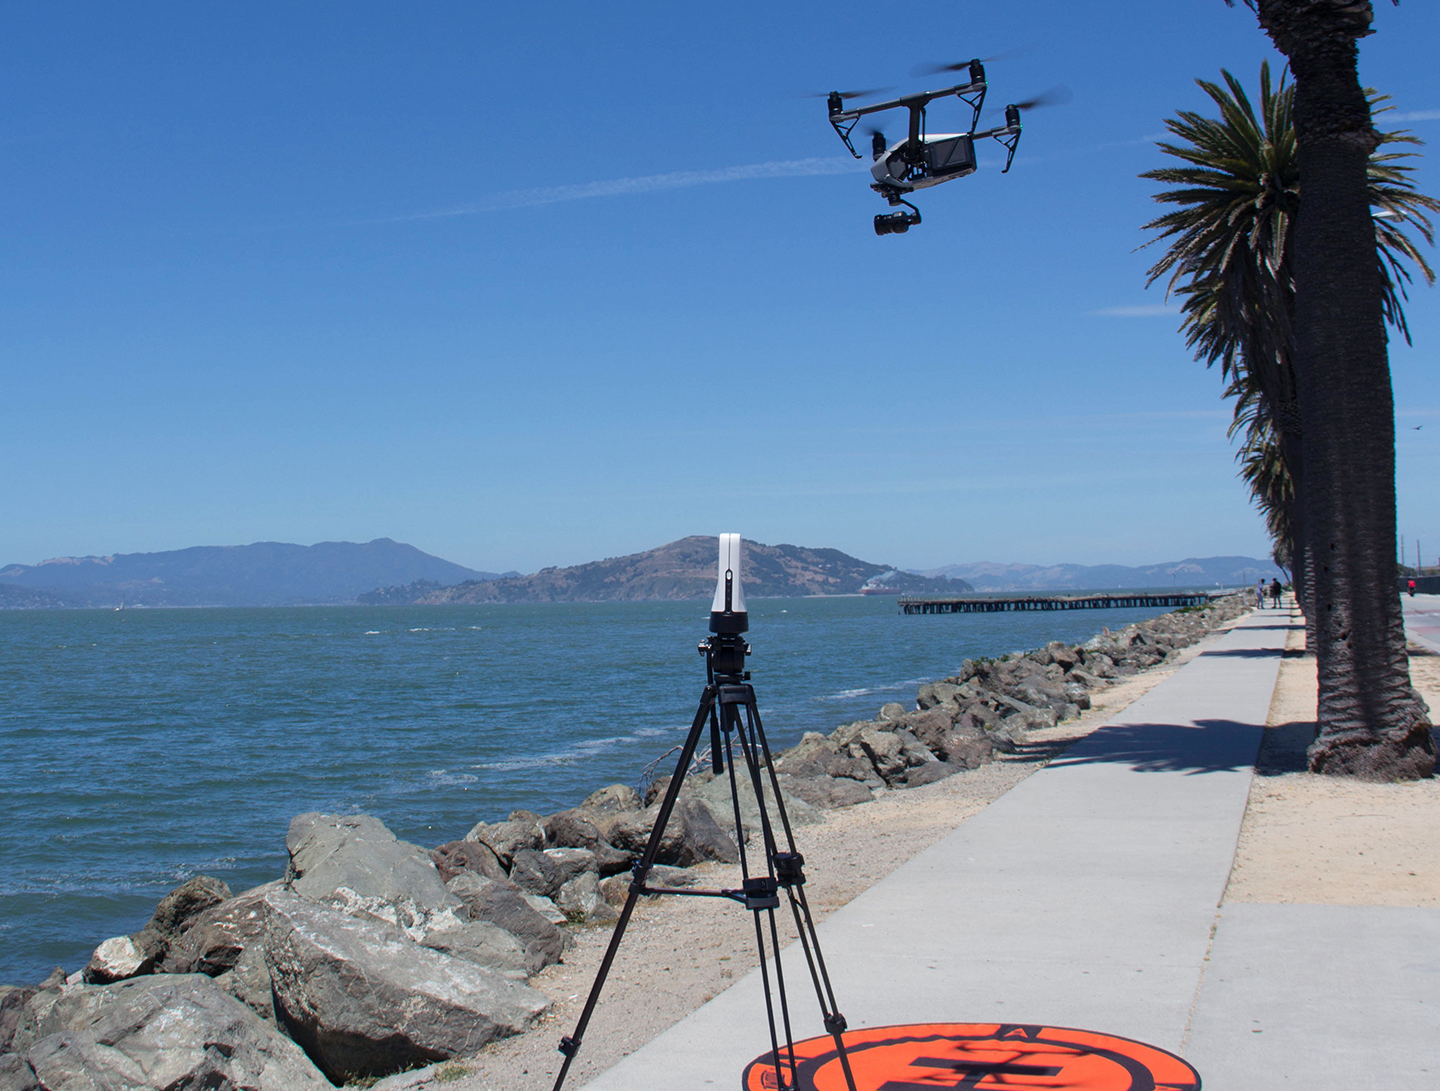 Sling’s video production device can use DJI drones for footage